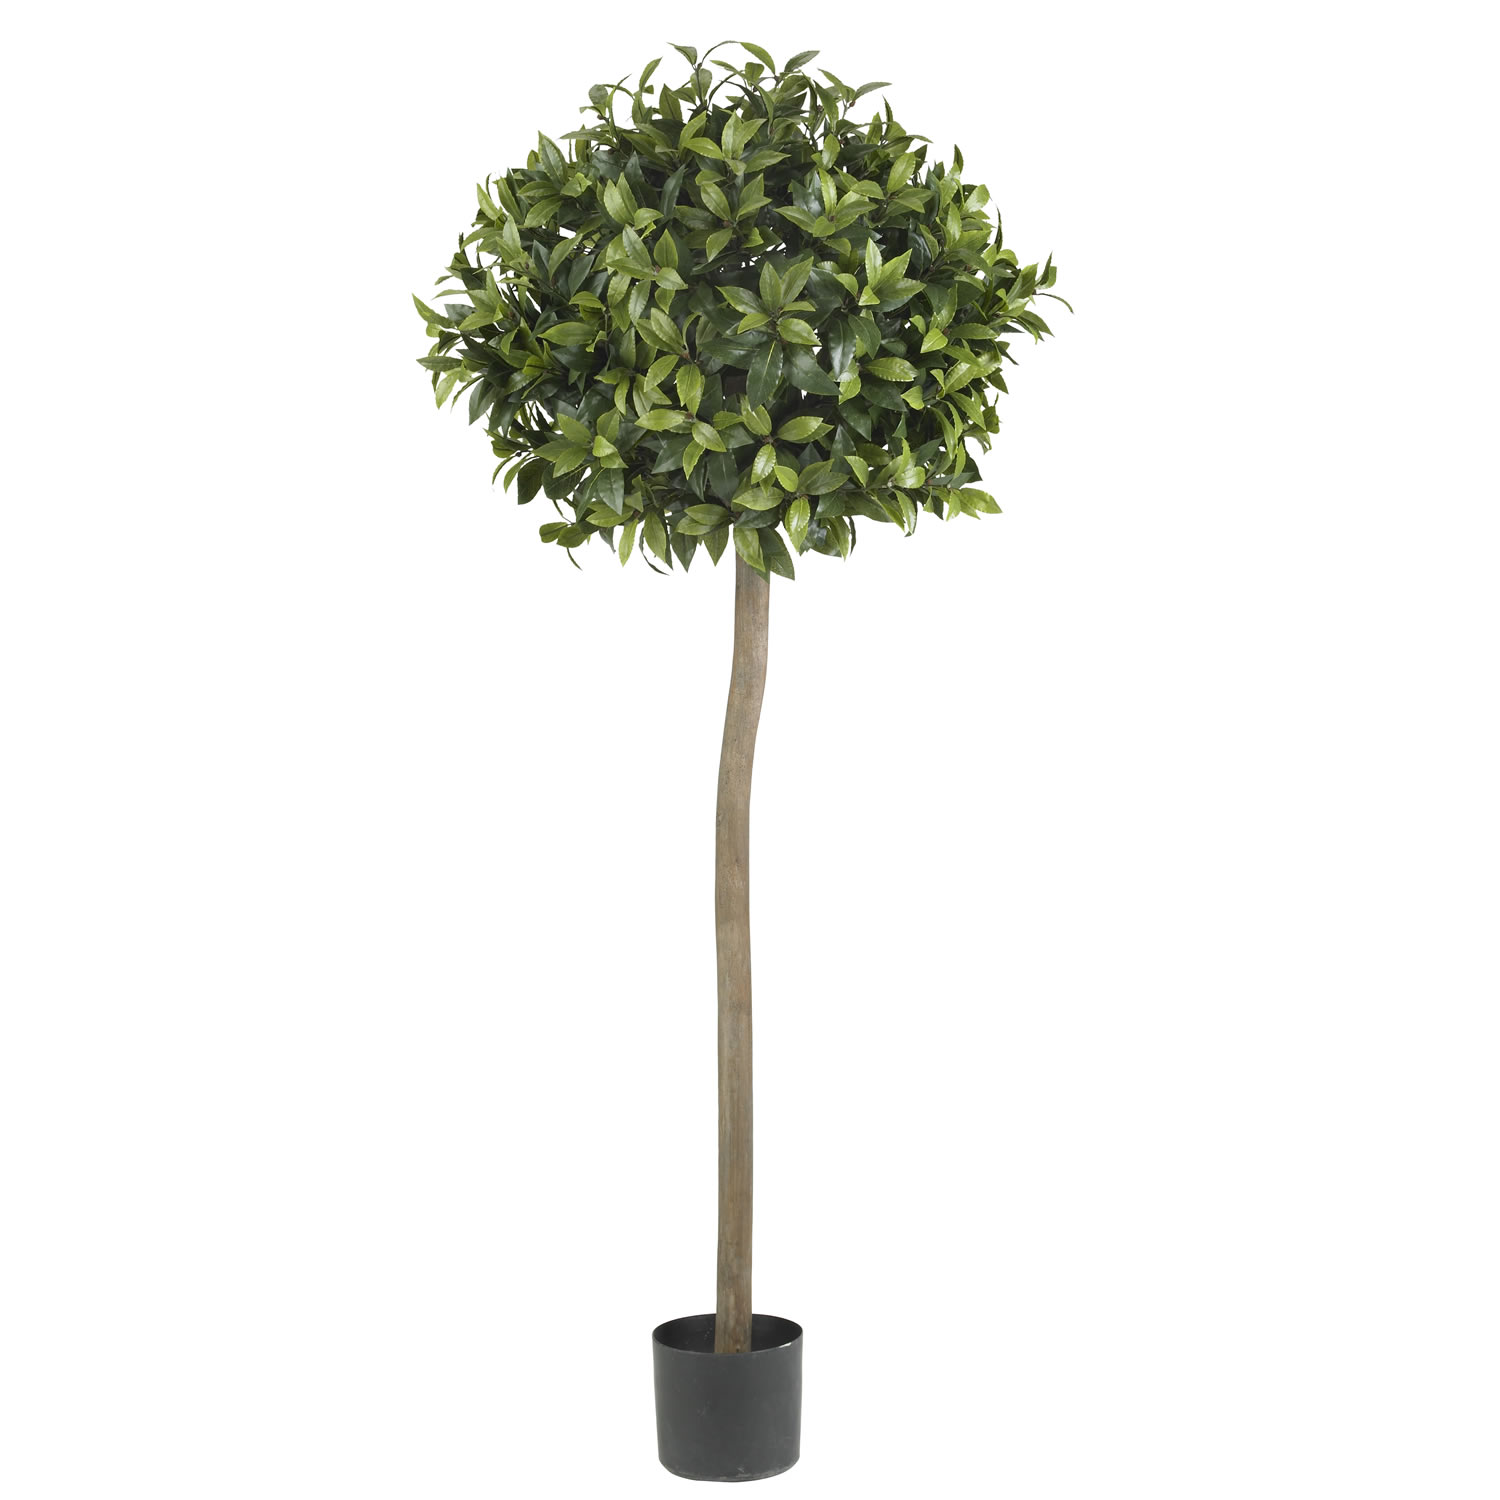 5 Foot Sweet Bay Ball Topiary Tree: Potted